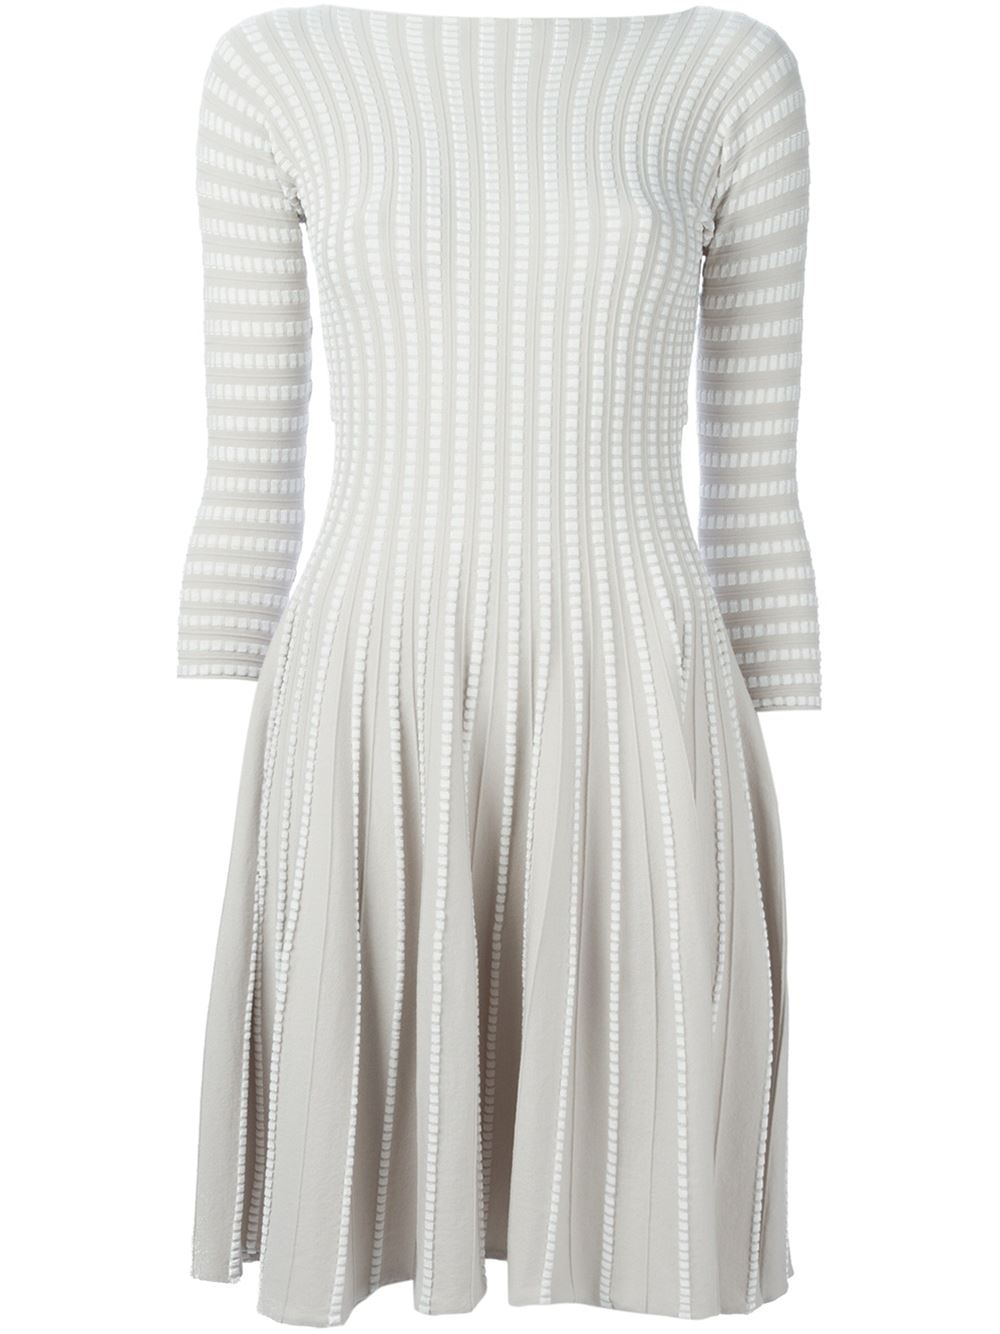 Lyst - Emporio Armani Pleated Knit Dress in Gray